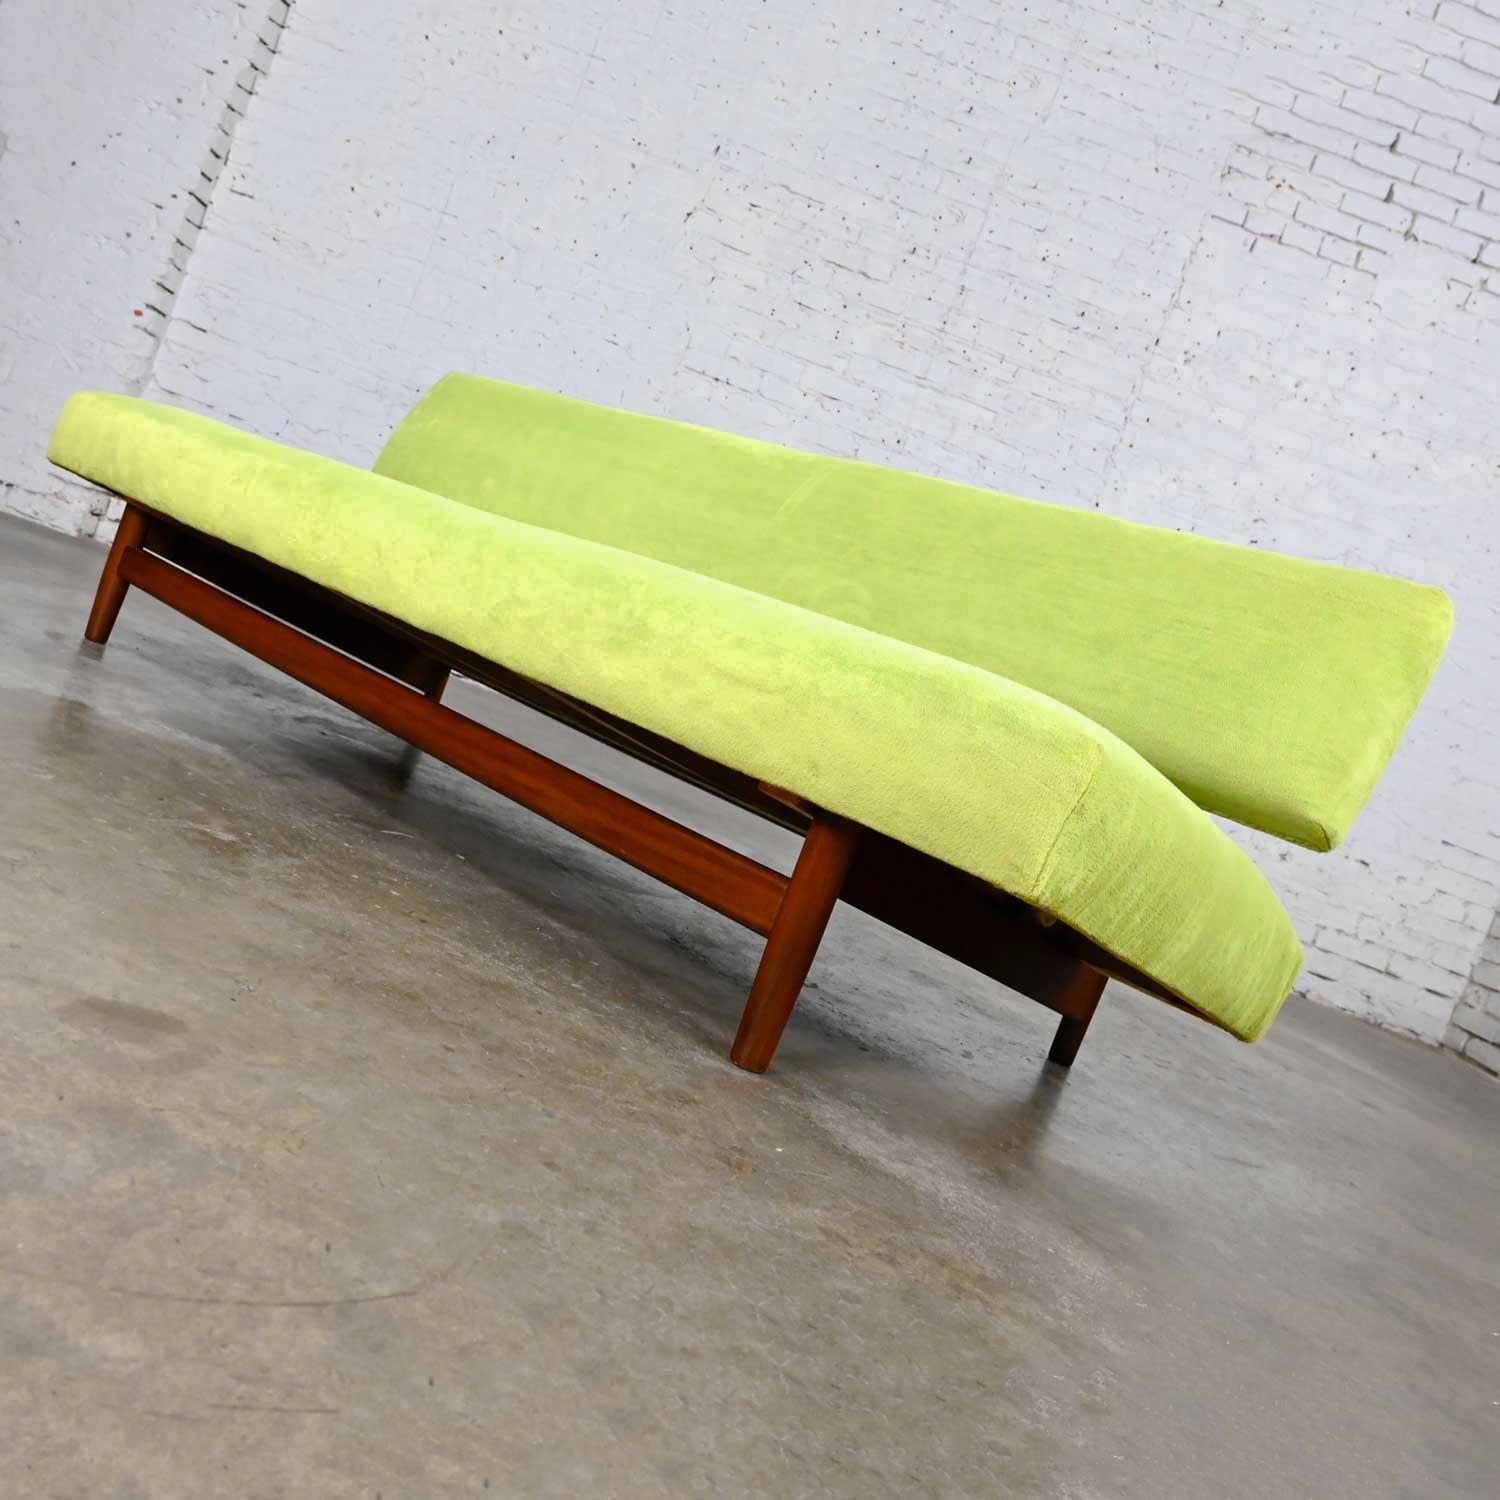 20th Century Scandinavian Modern Dutch Sofa Attr to Doublet Sofa by Rob Parry for Gelderland For Sale